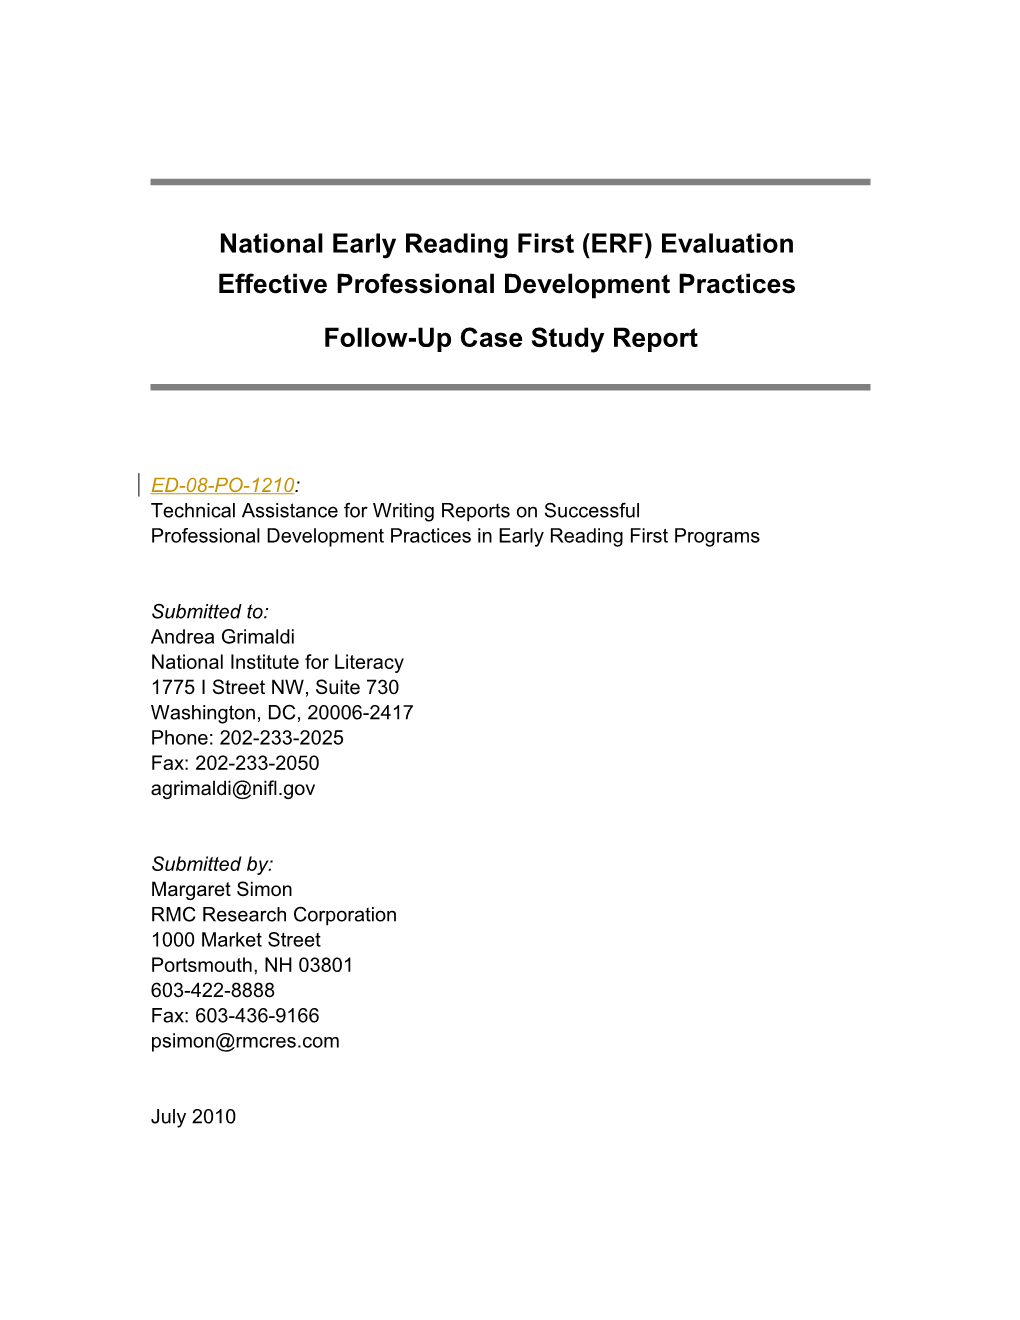 National Early Reading First (ERF) Evaluation